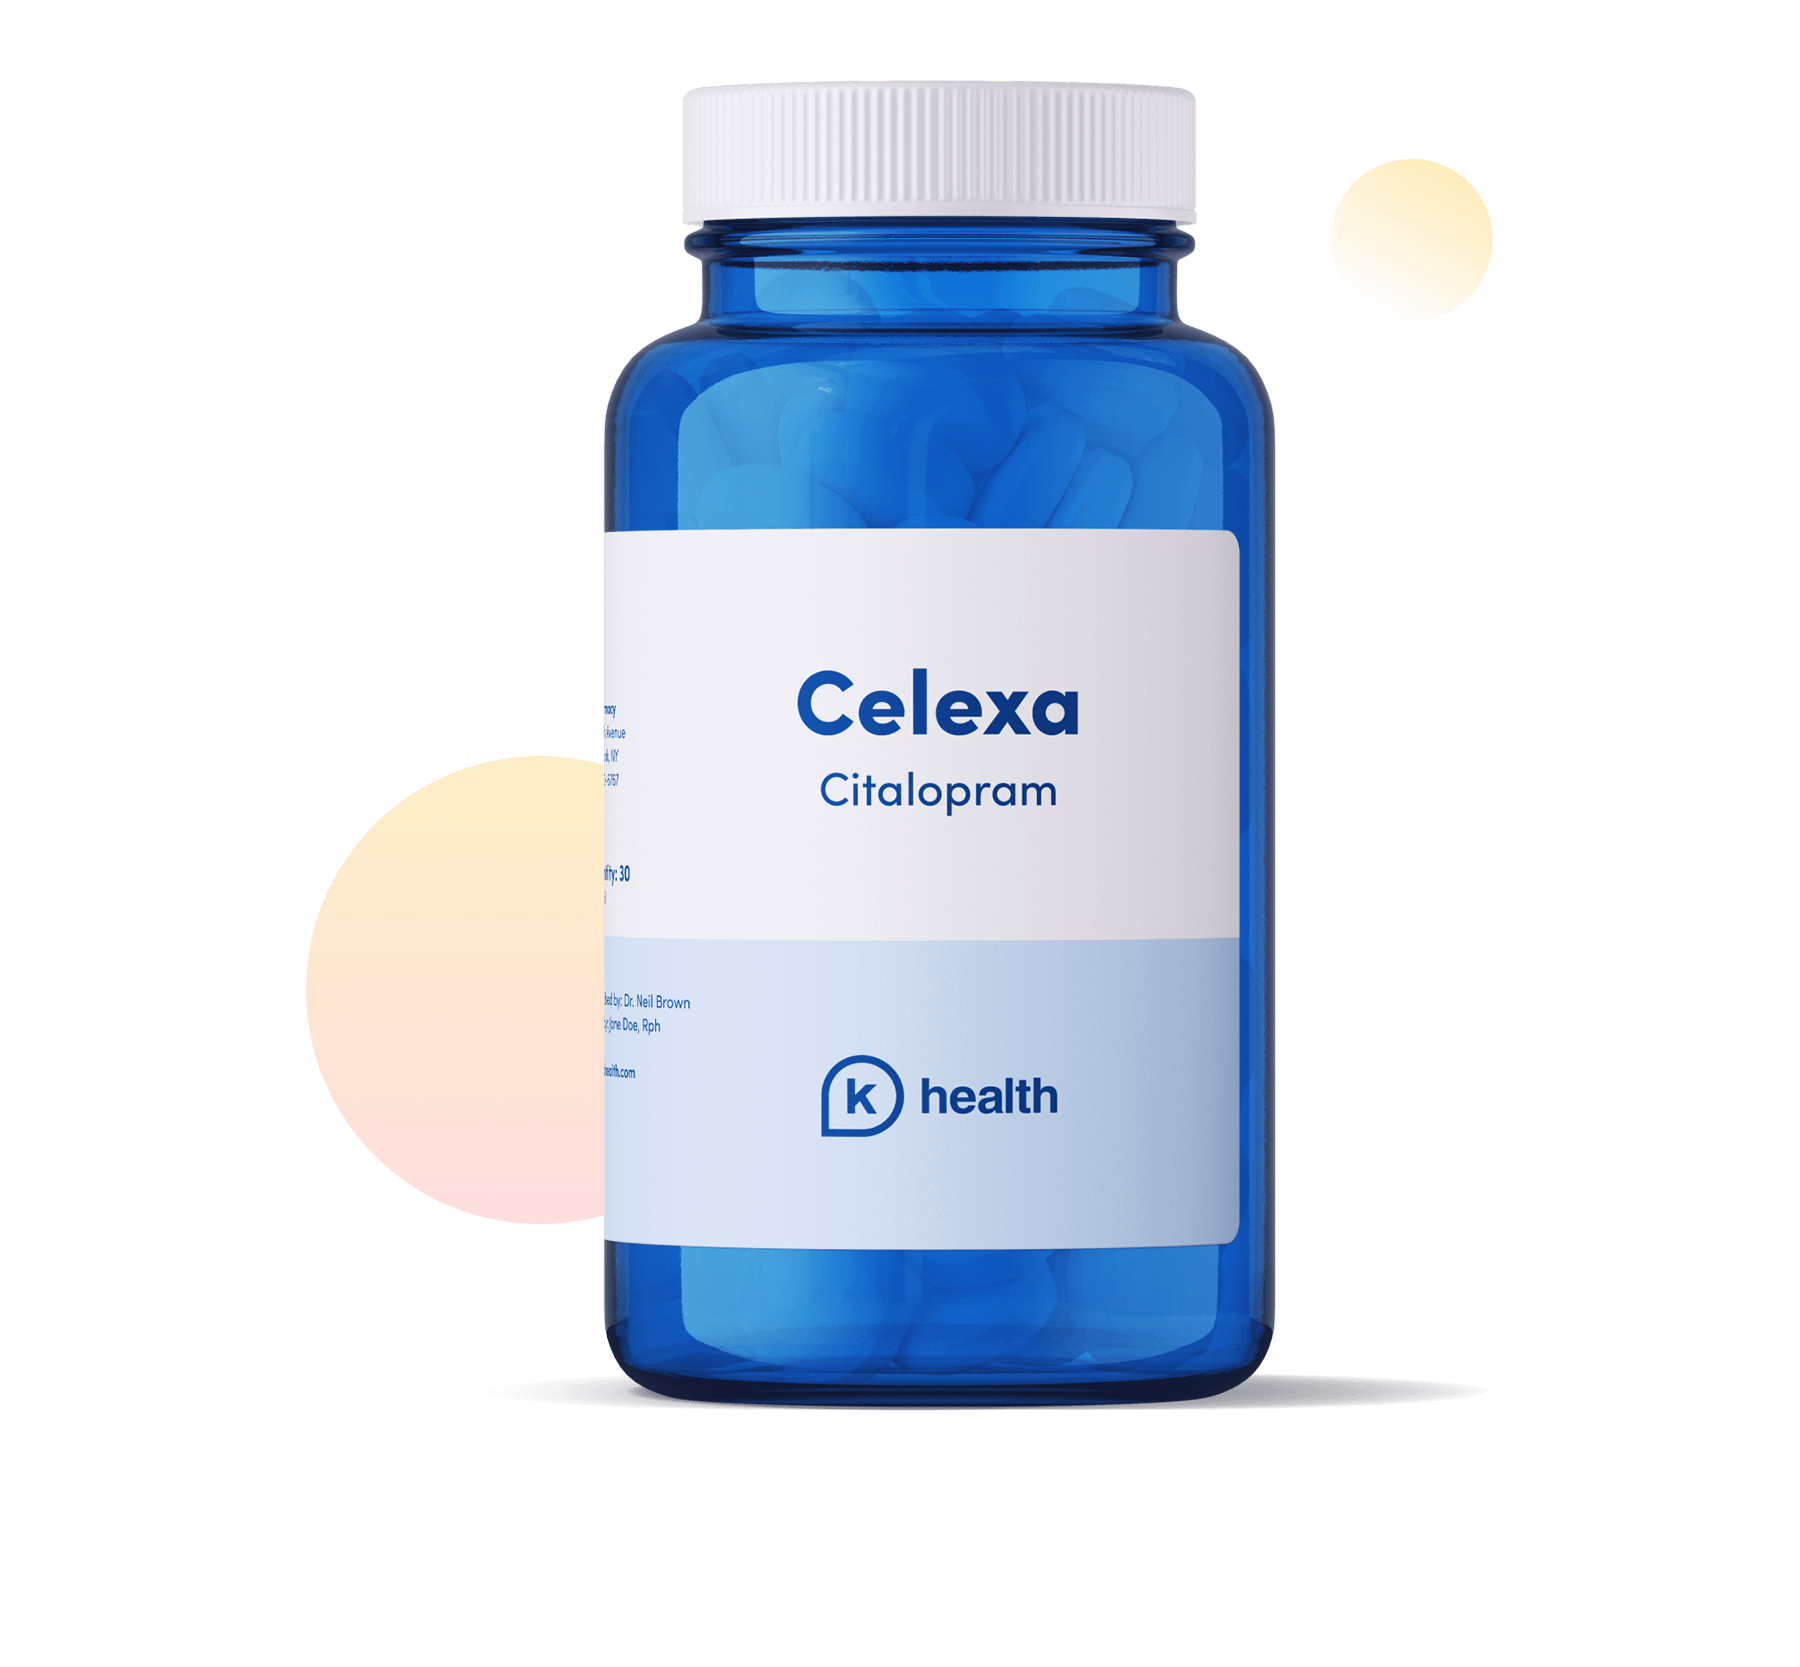 Celexa for Anxiety: What You Need to Know